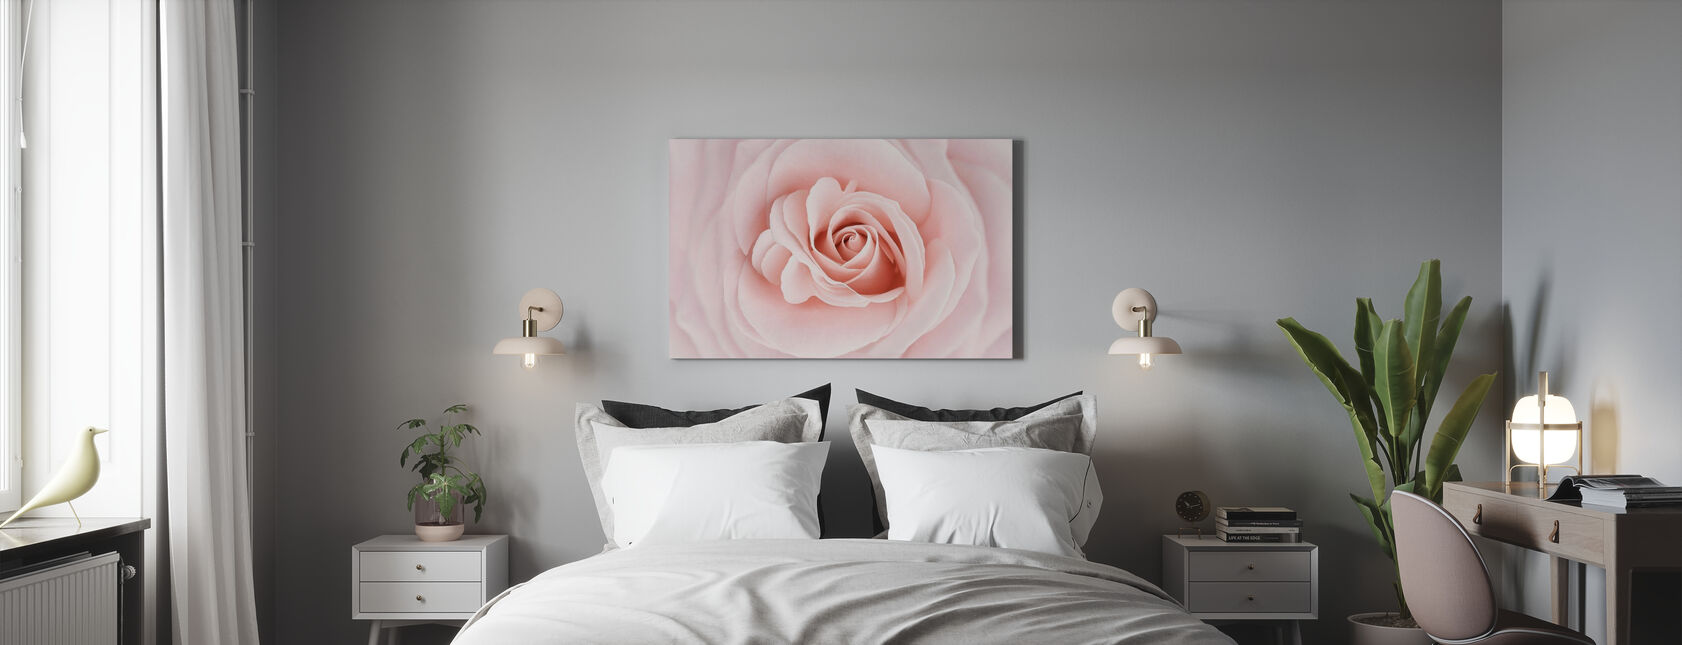 Soft Rose in Peach Pink Shades - Canvas print - Bedroom